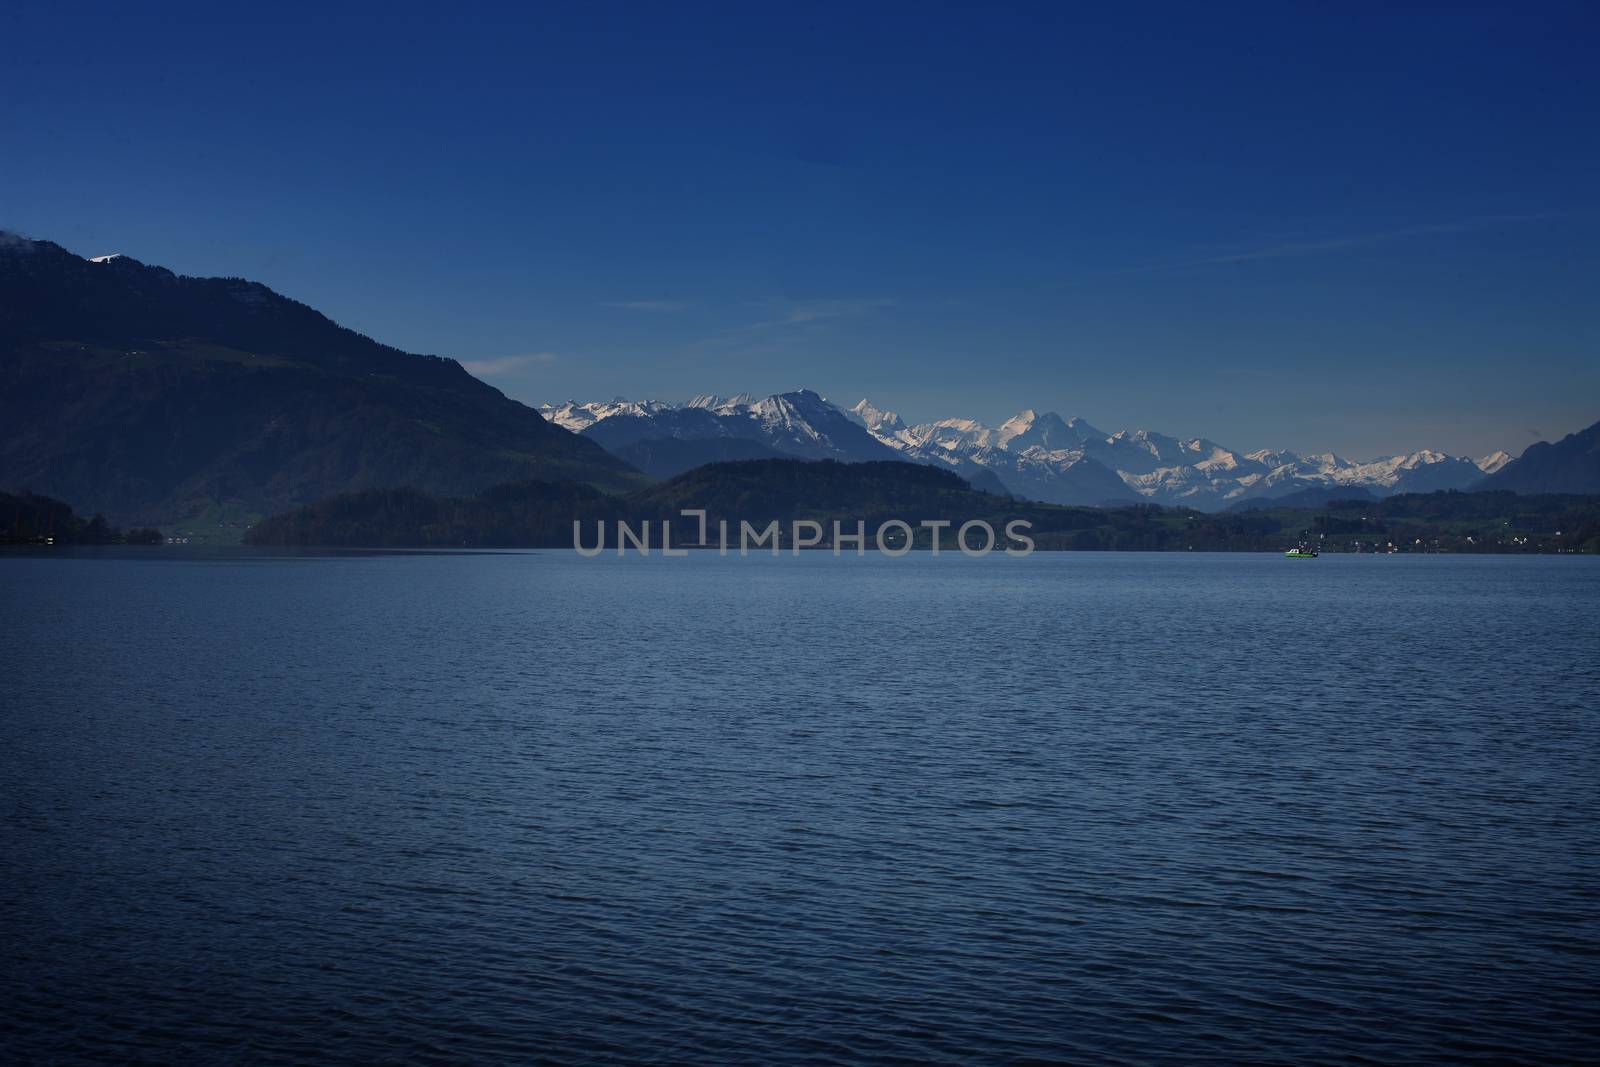 pictures of the city of Zug, Switzerland by PeterHofstetter